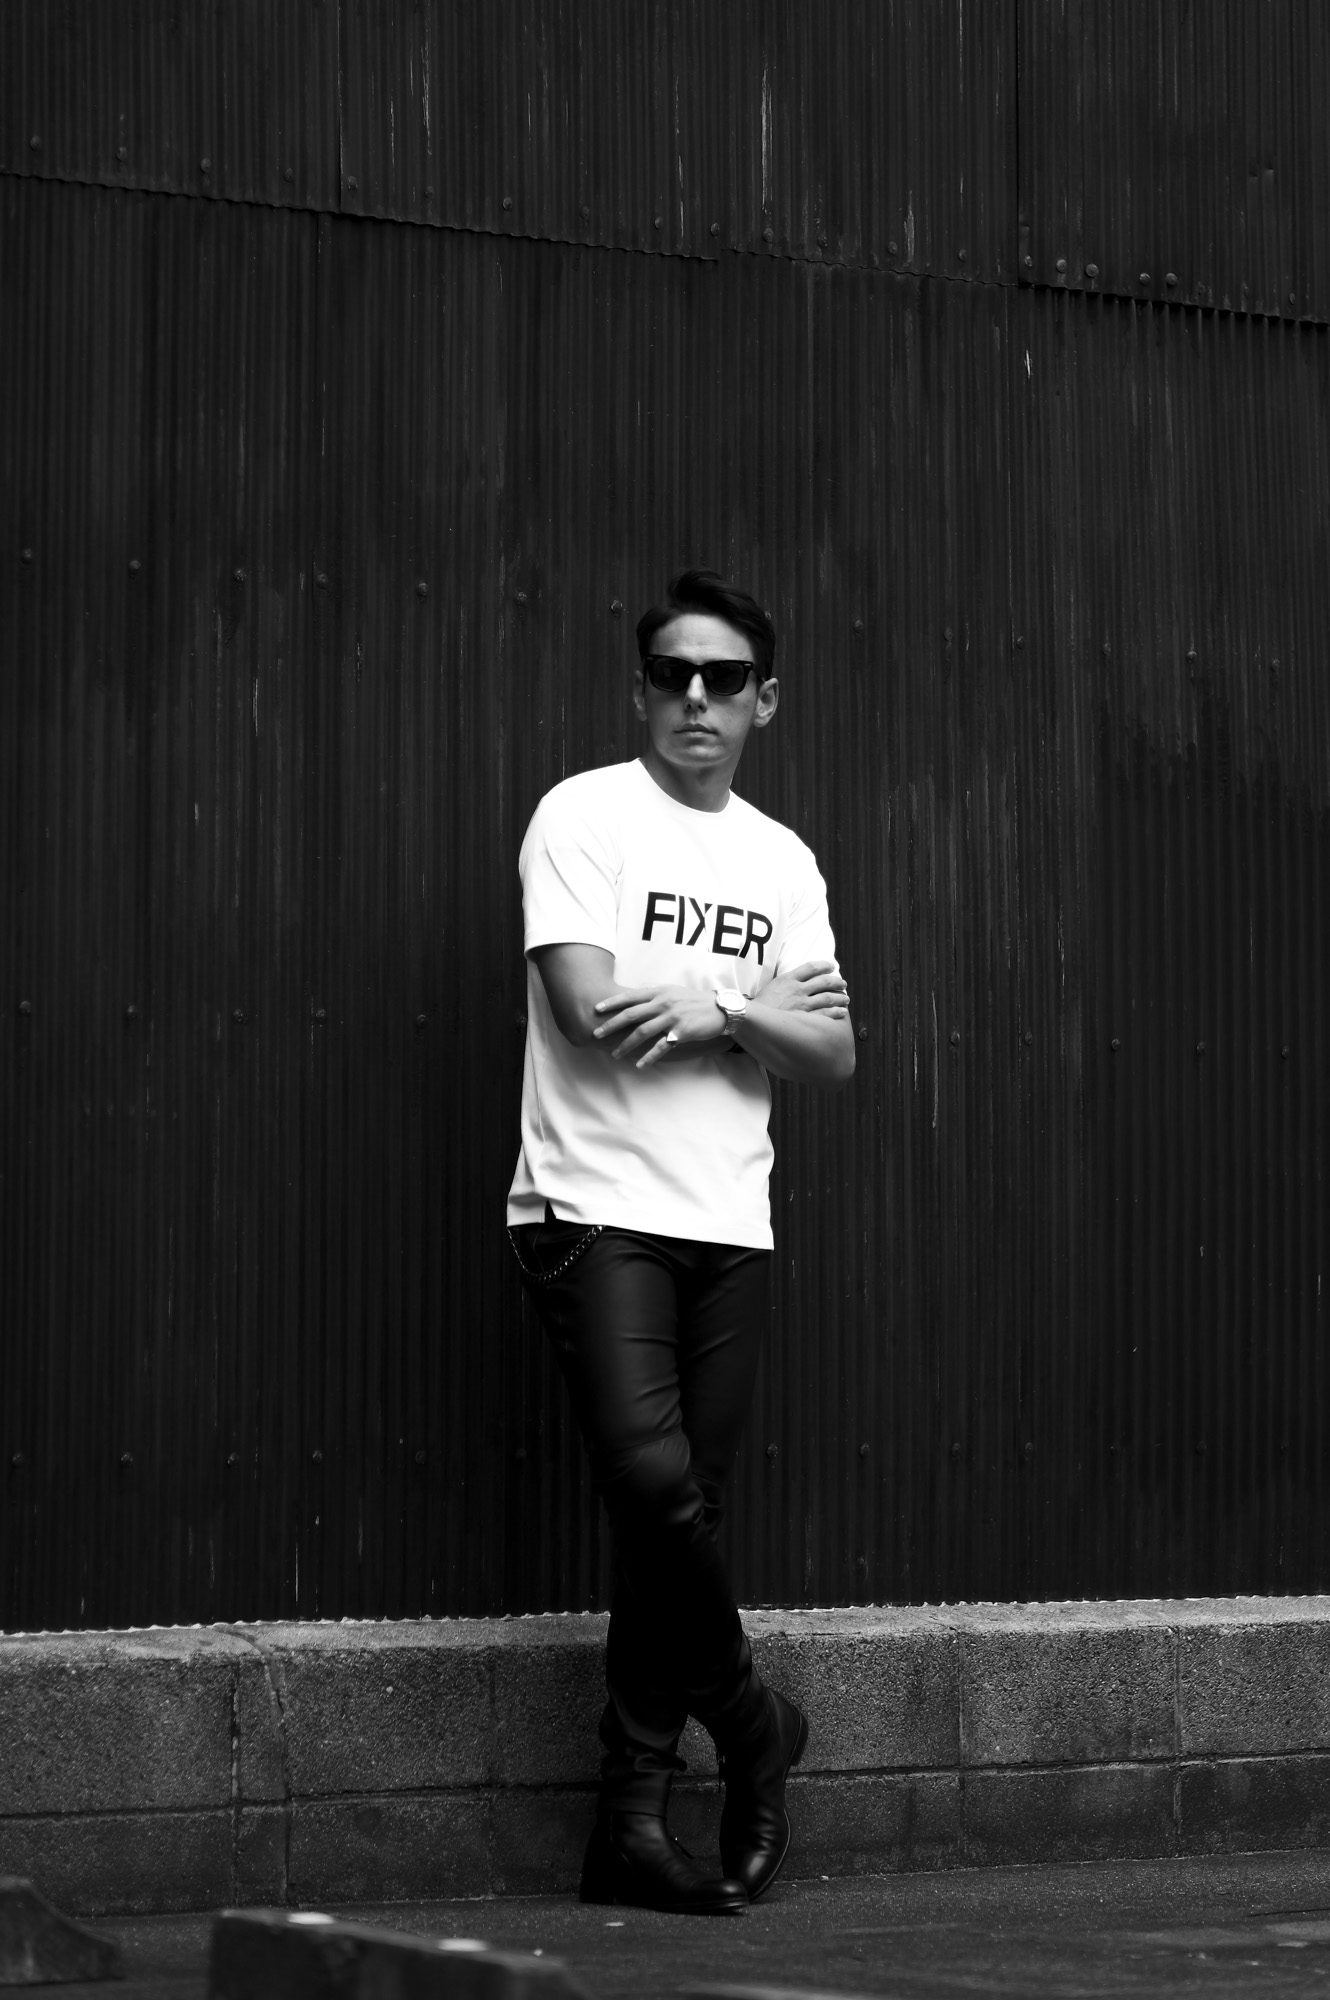 FIXER "FTS-02" Print Crew Neck T-shirt WHITE 【Special Model】【東京限定】フィクサー プリントTシャツ ホワイト ブラックロゴ 愛知 名古屋 Alto e Diritto altoediritto アルトエデリット